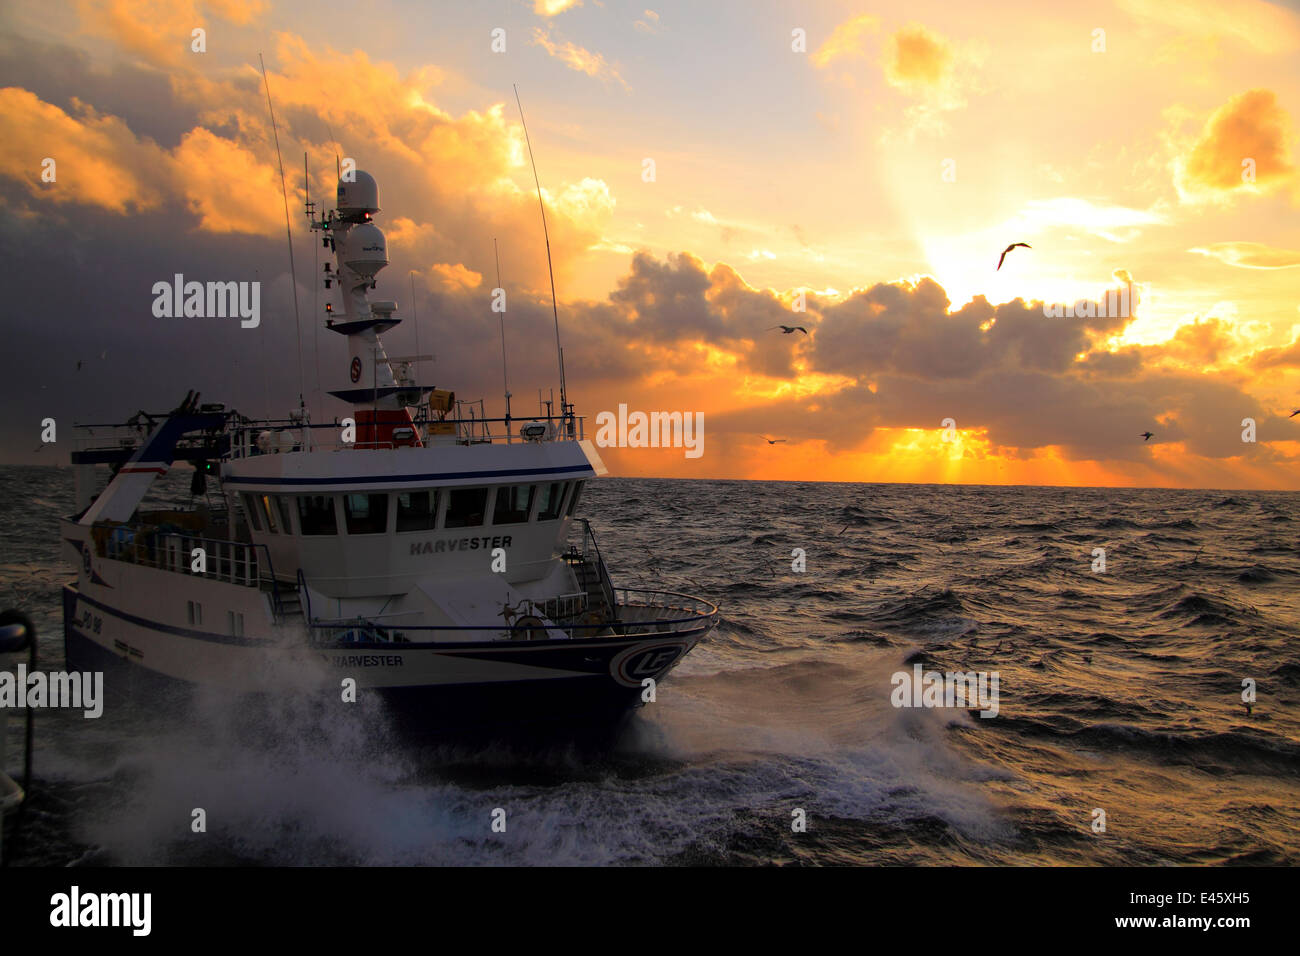 Fishing vessel 'Harvester' at sunset on the North Sea, Europe, November 2010. Property released. Stock Photo